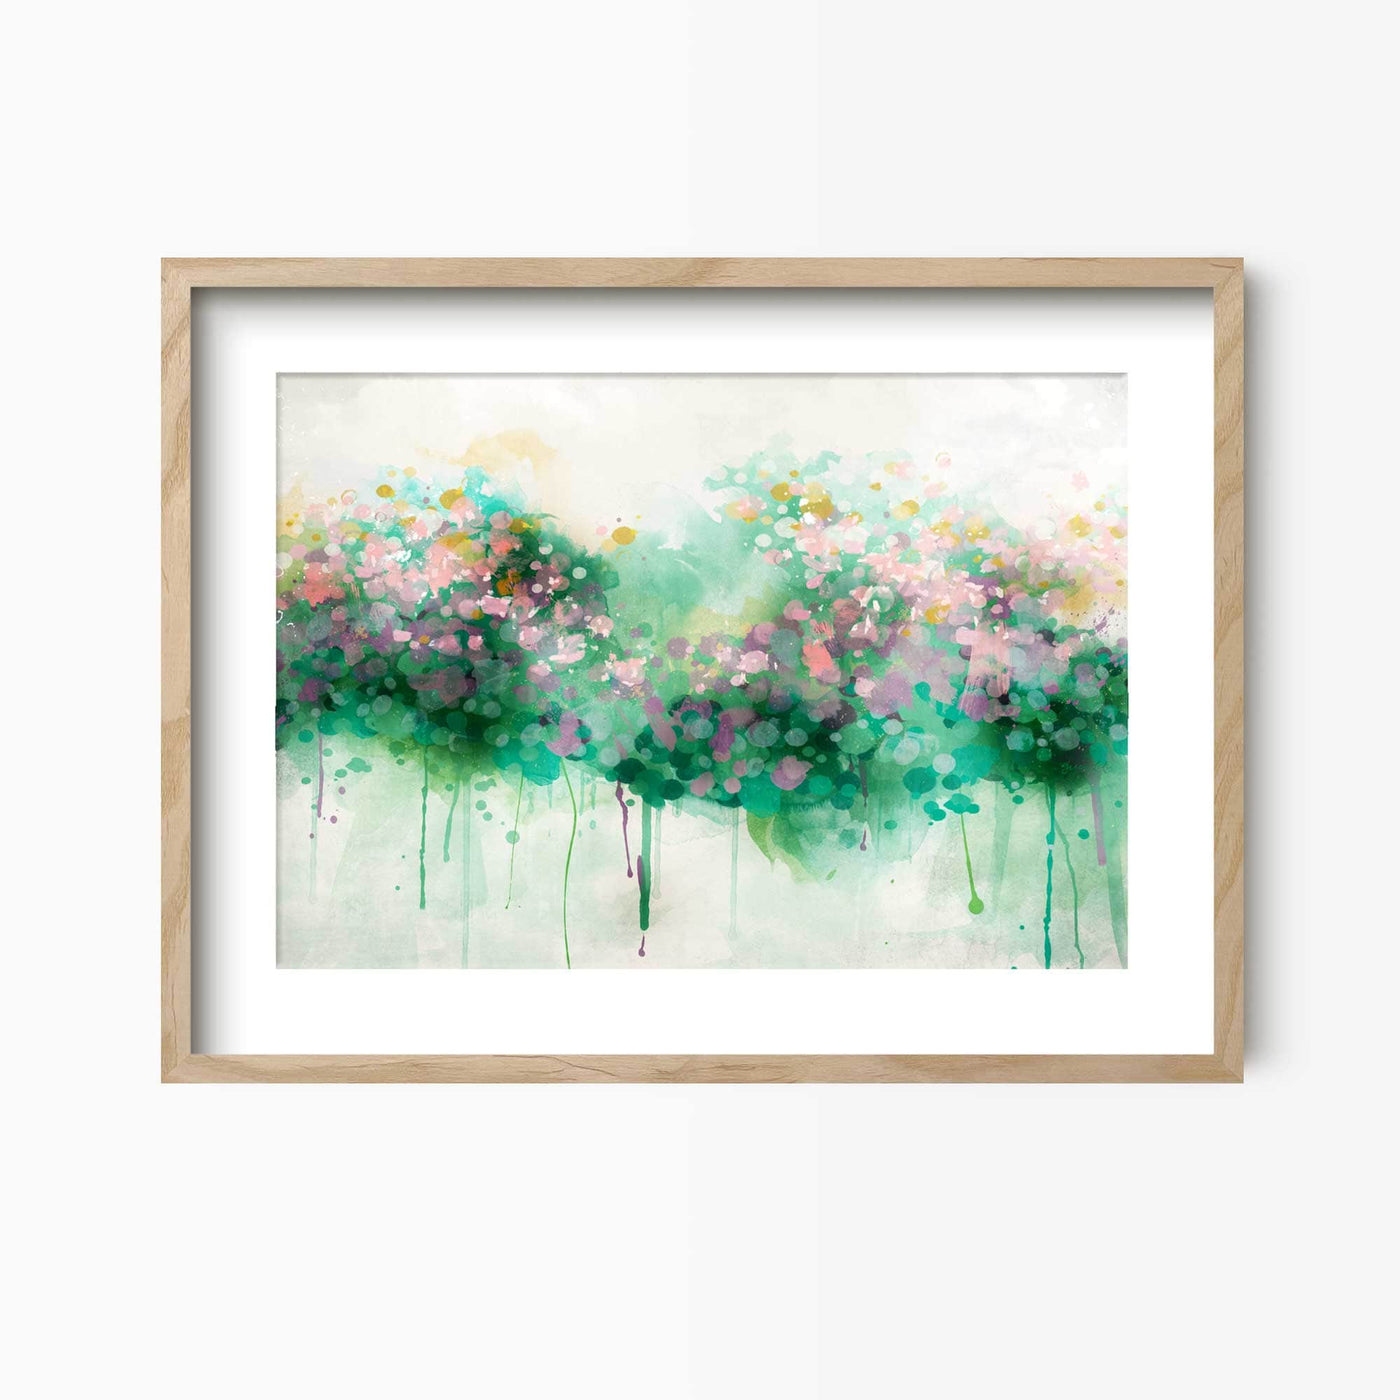 Green Lili 30x40cm (12x16") / Natural Frame + Mount Spring Bloom Abstract Floral Art Print